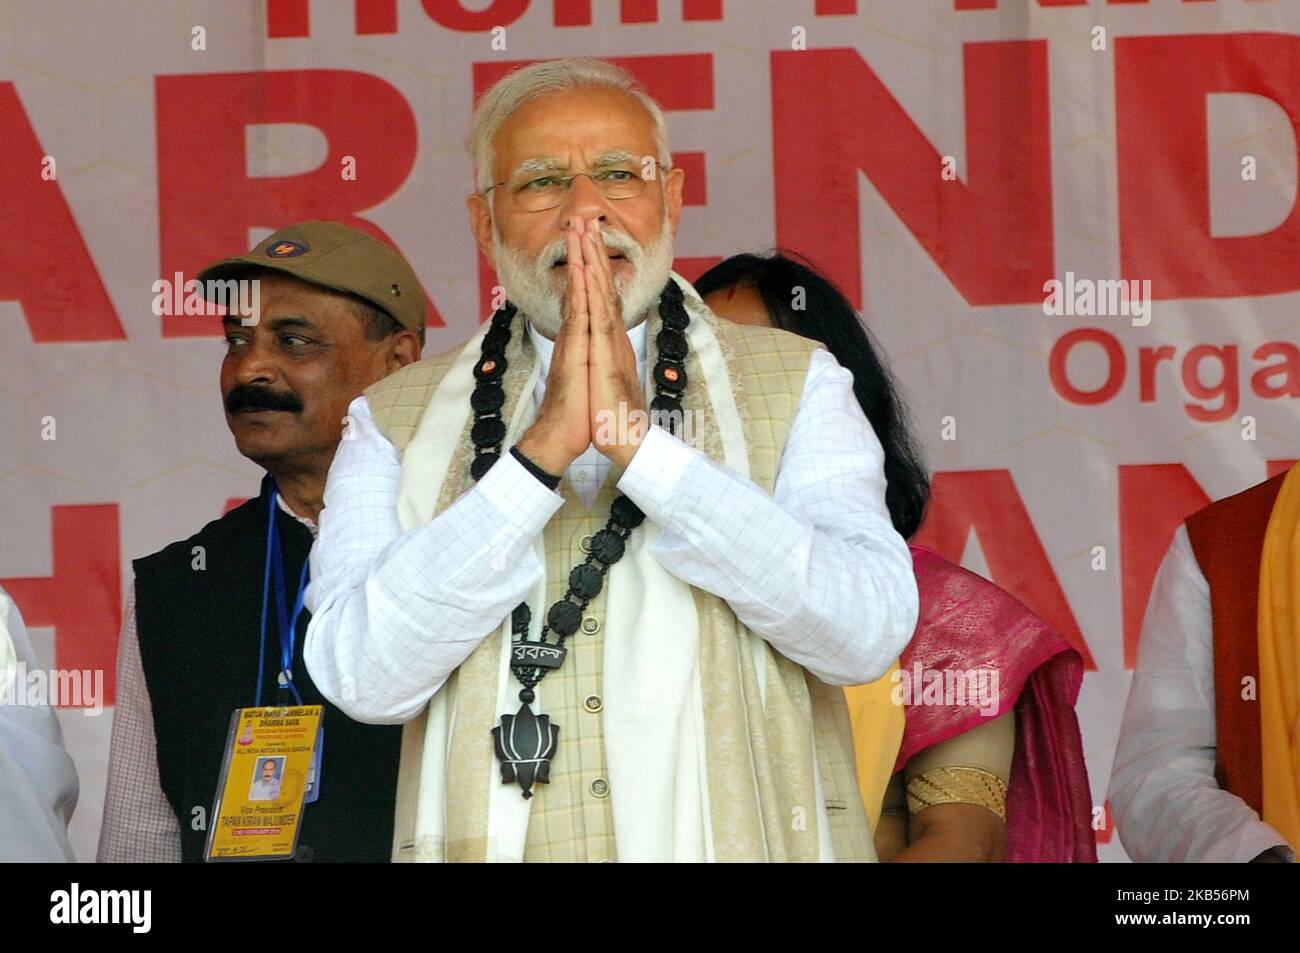 Prime Minister Narendra Modi during a public speaks in North 24 Parganas, on February 2, 2019 in Thakurnagar, India. Prime Minister Narendra Modi cut short his speech at a rally in North 24 Parganas district on Saturday after a stampede-like situation broke out at the venue in which many people were injured. (Photo by Debajyoti Chakraborty/NurPhoto) Stock Photo